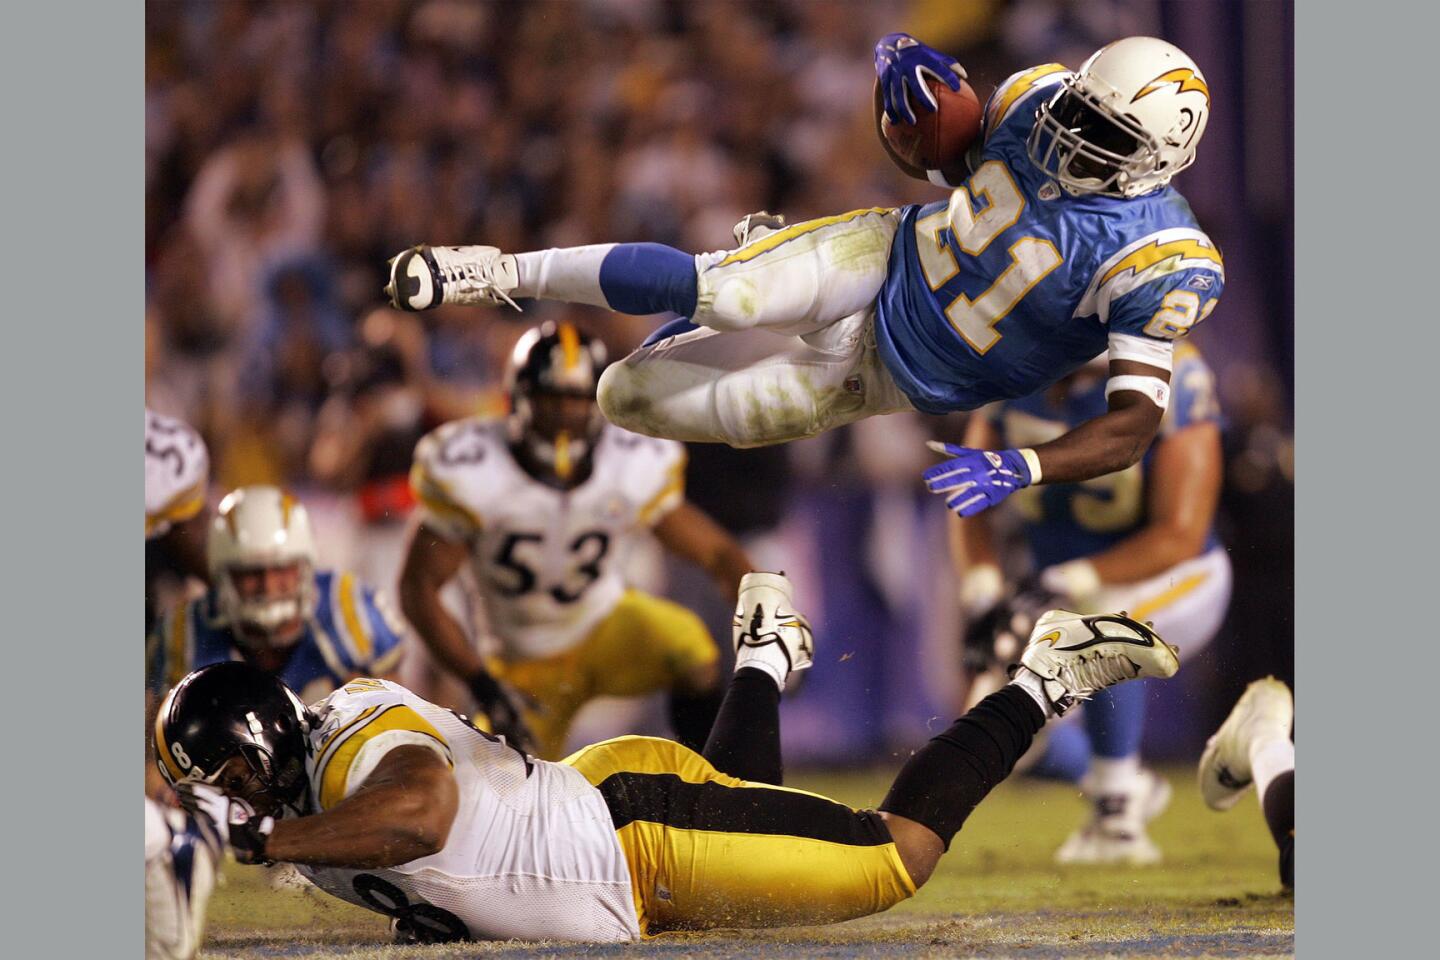 LaDainian Tomlinson loyal to Chargers, San Diego after relocation